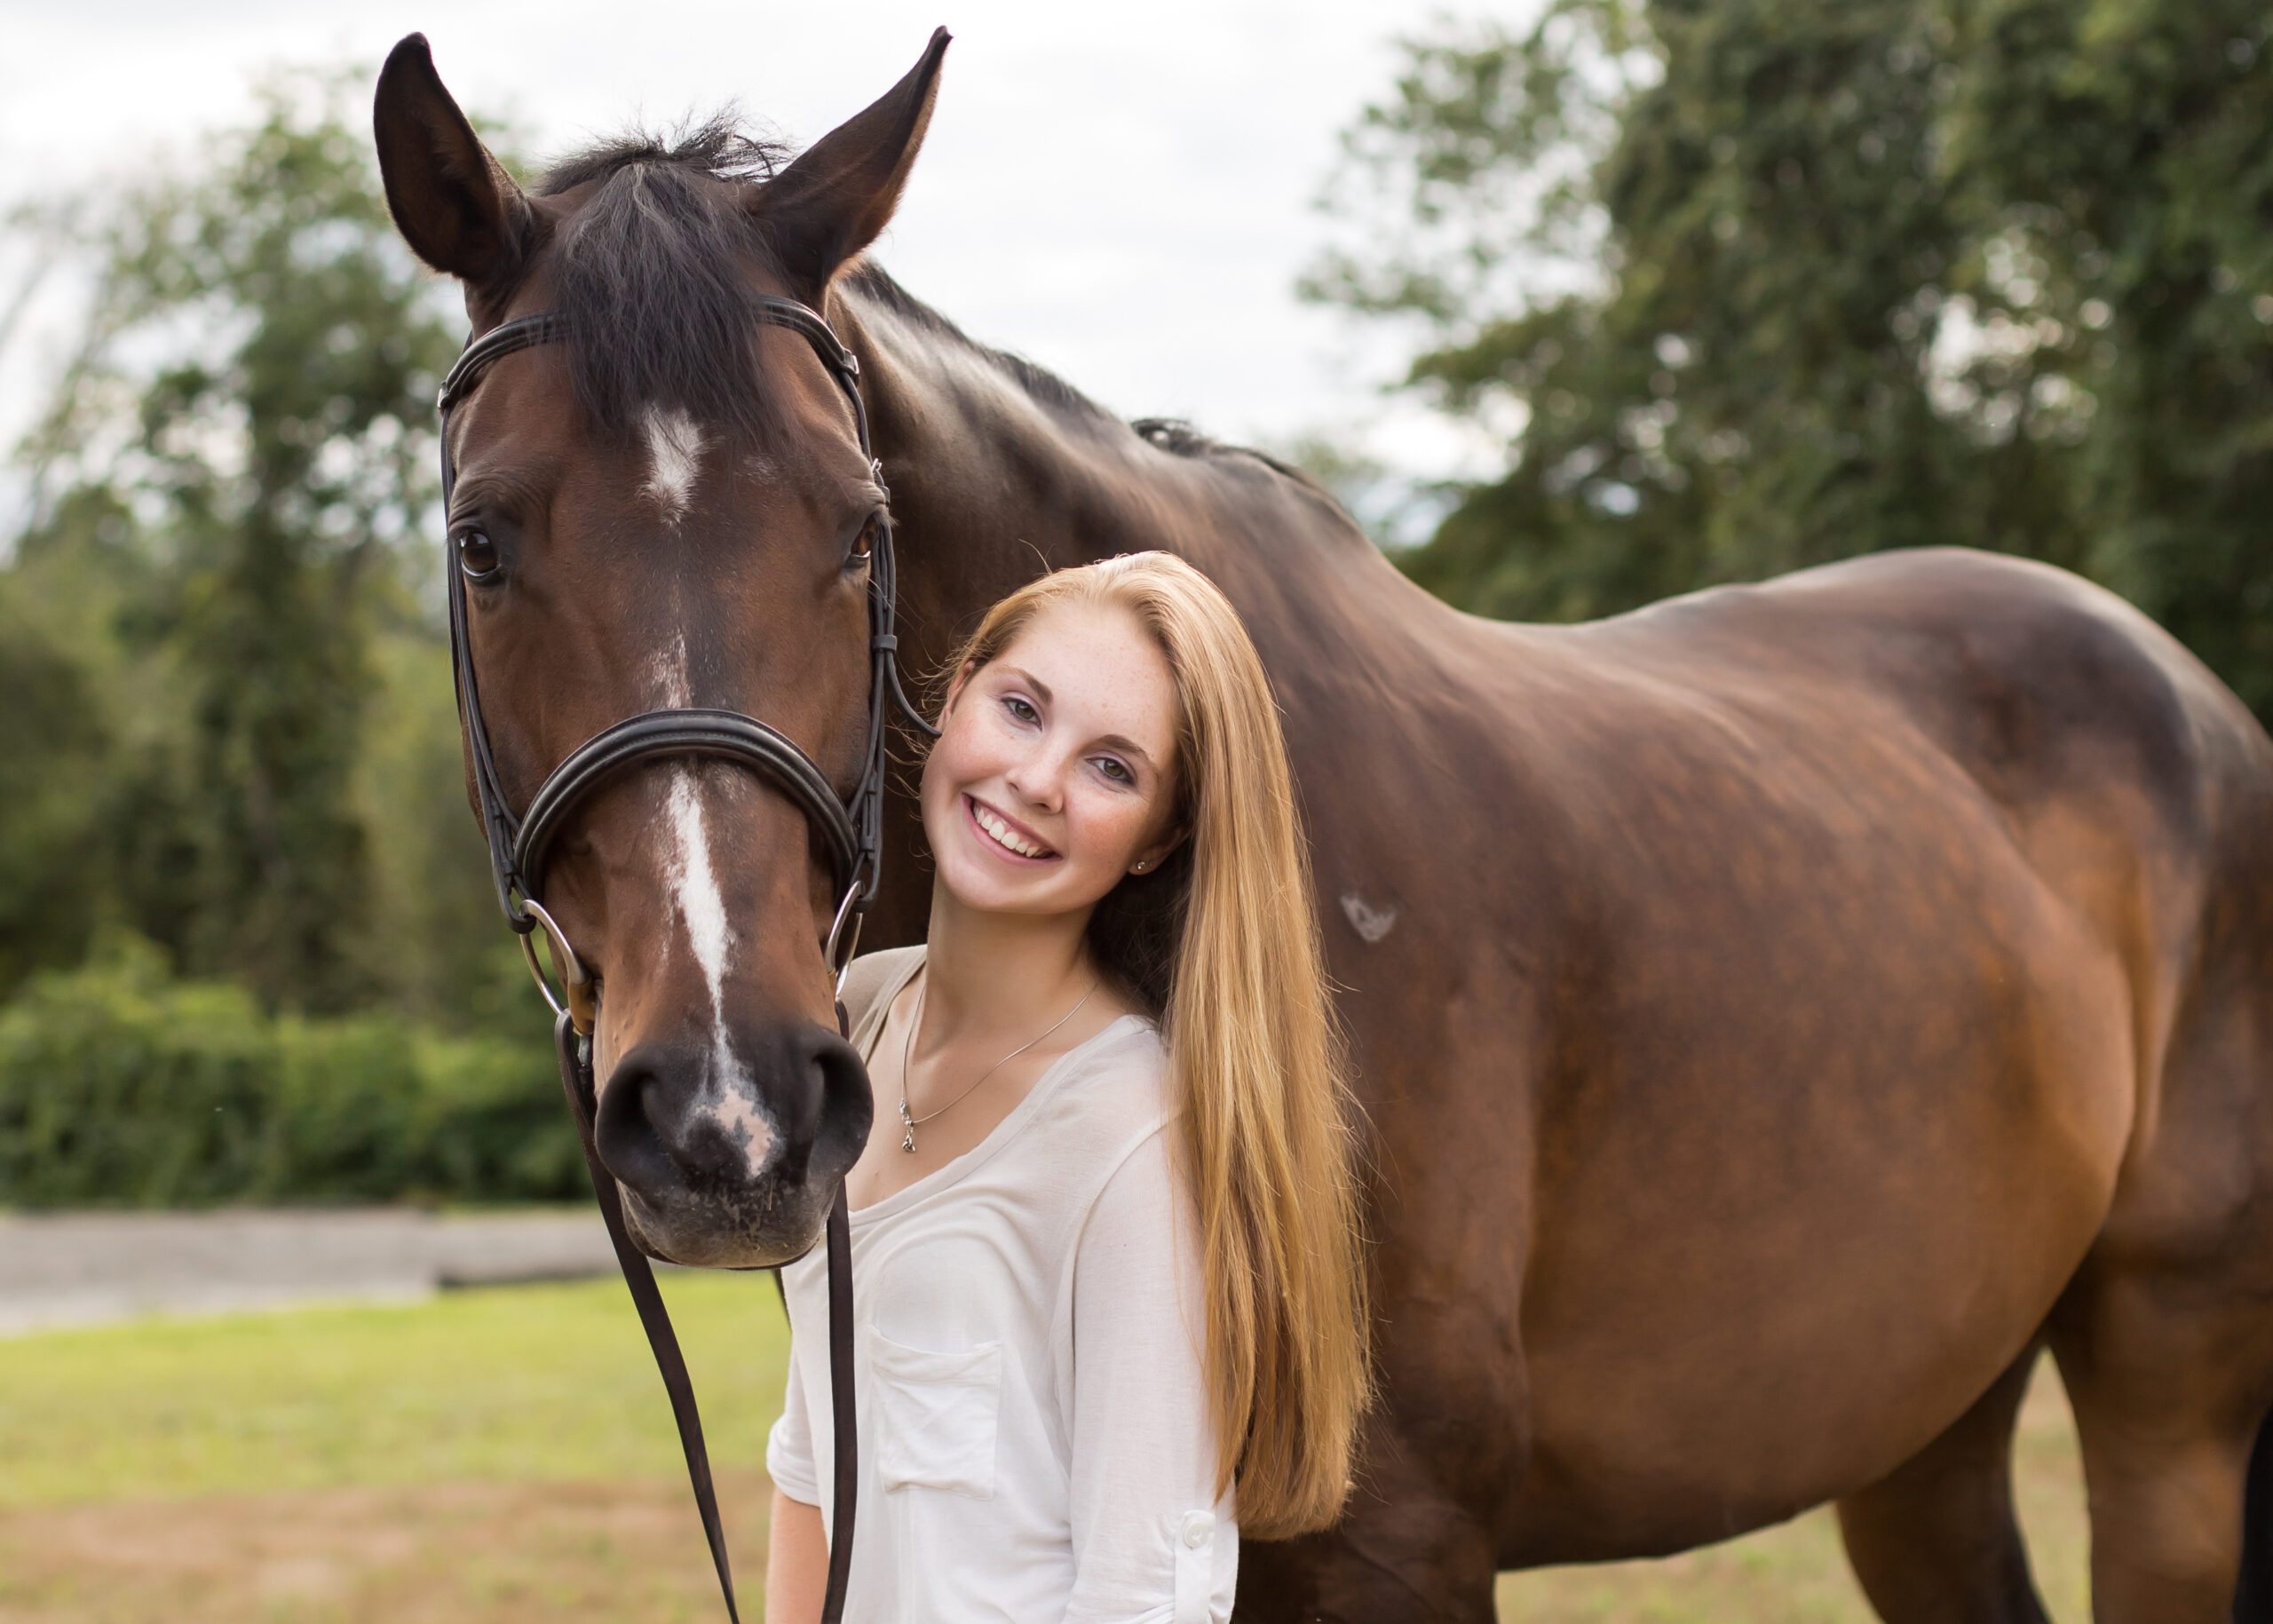 Senior portrait of a young woman with her horse standing in a field in Massachusetts photographed by Sean Wytrwal of J&S Photography